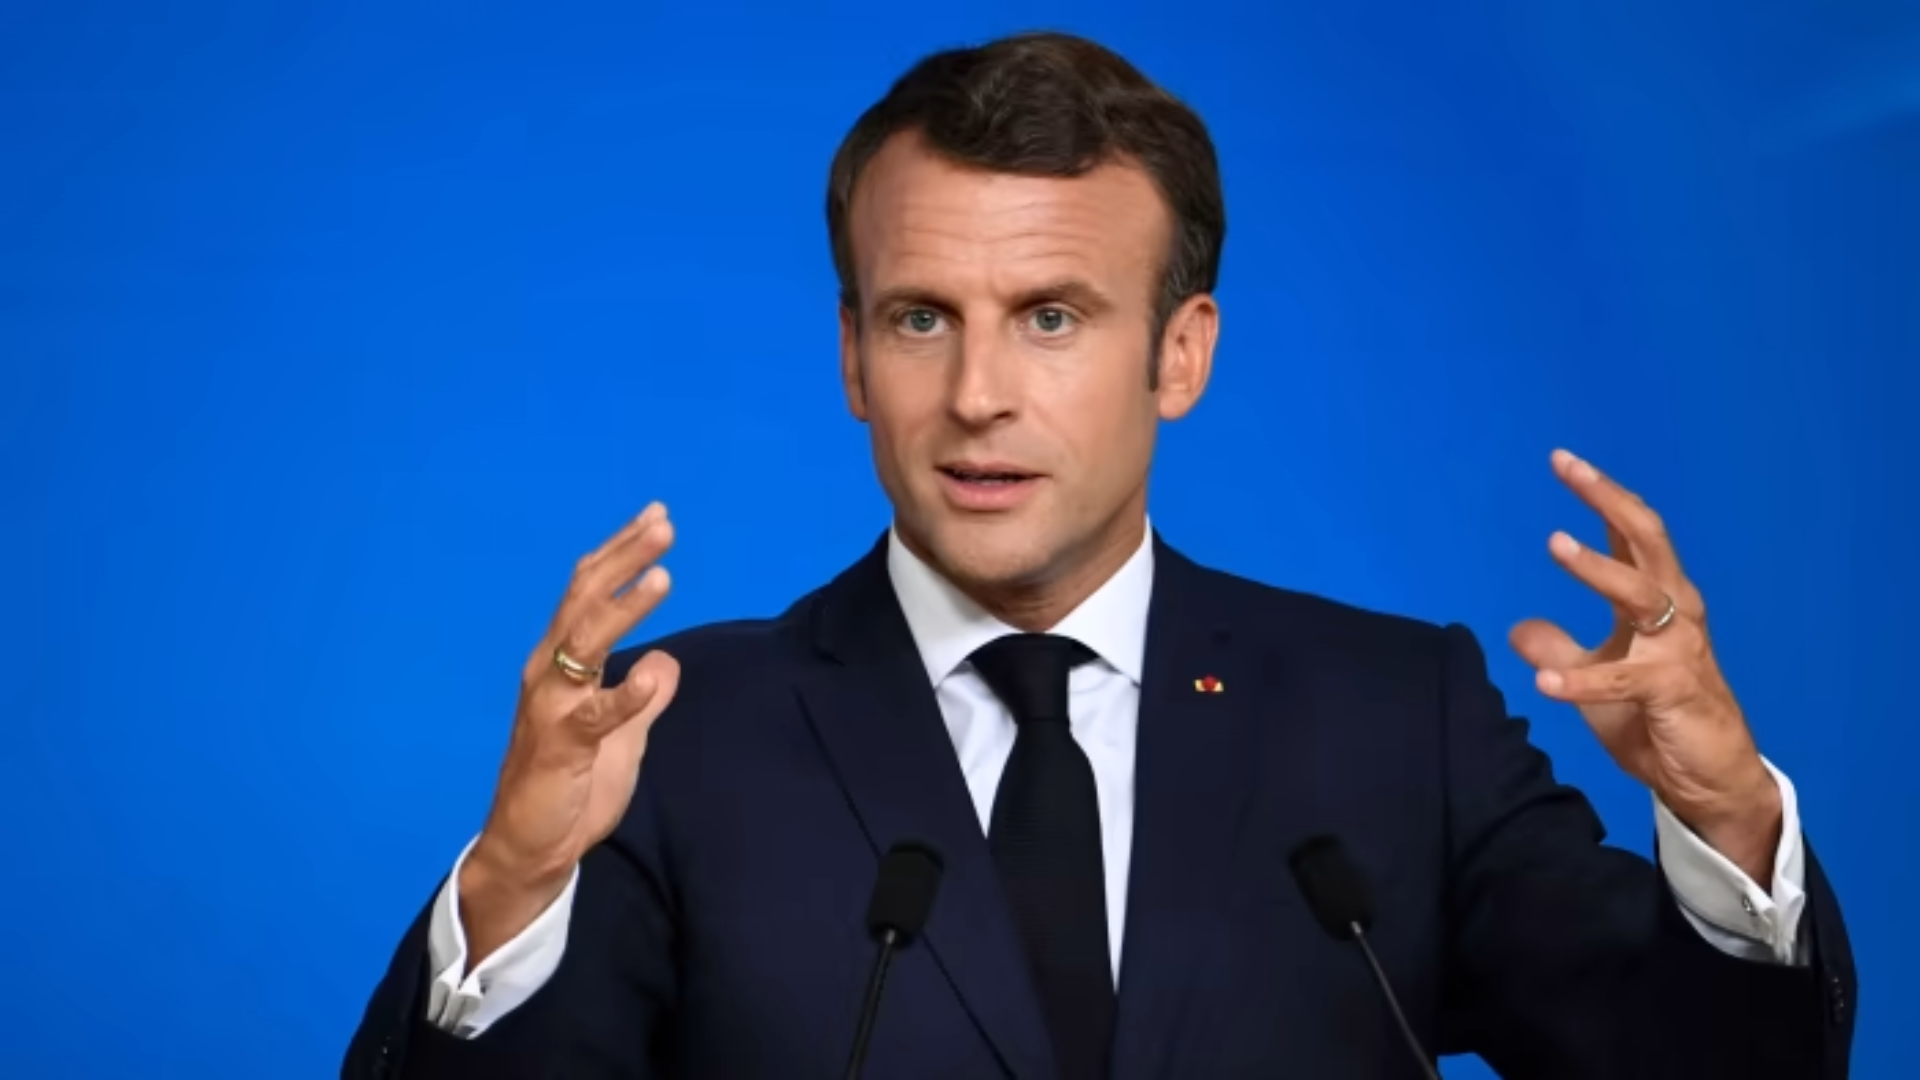 French President Emmanuel Macron Claims Russia Would Target France During Paris Olympics: “I Have No Doubt Whatsoever”